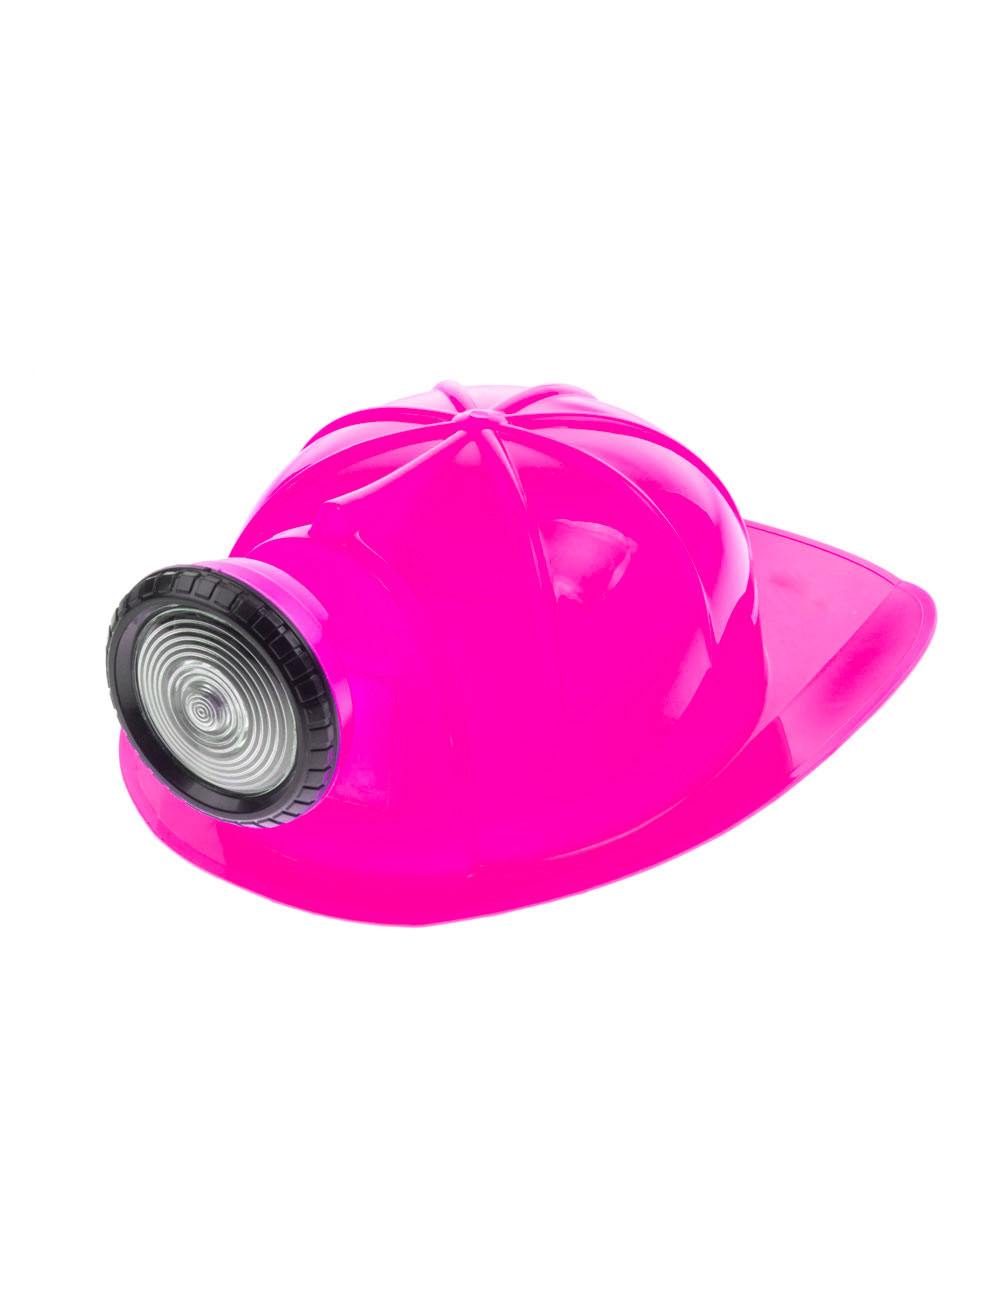 Helm mit Lampe pink one size